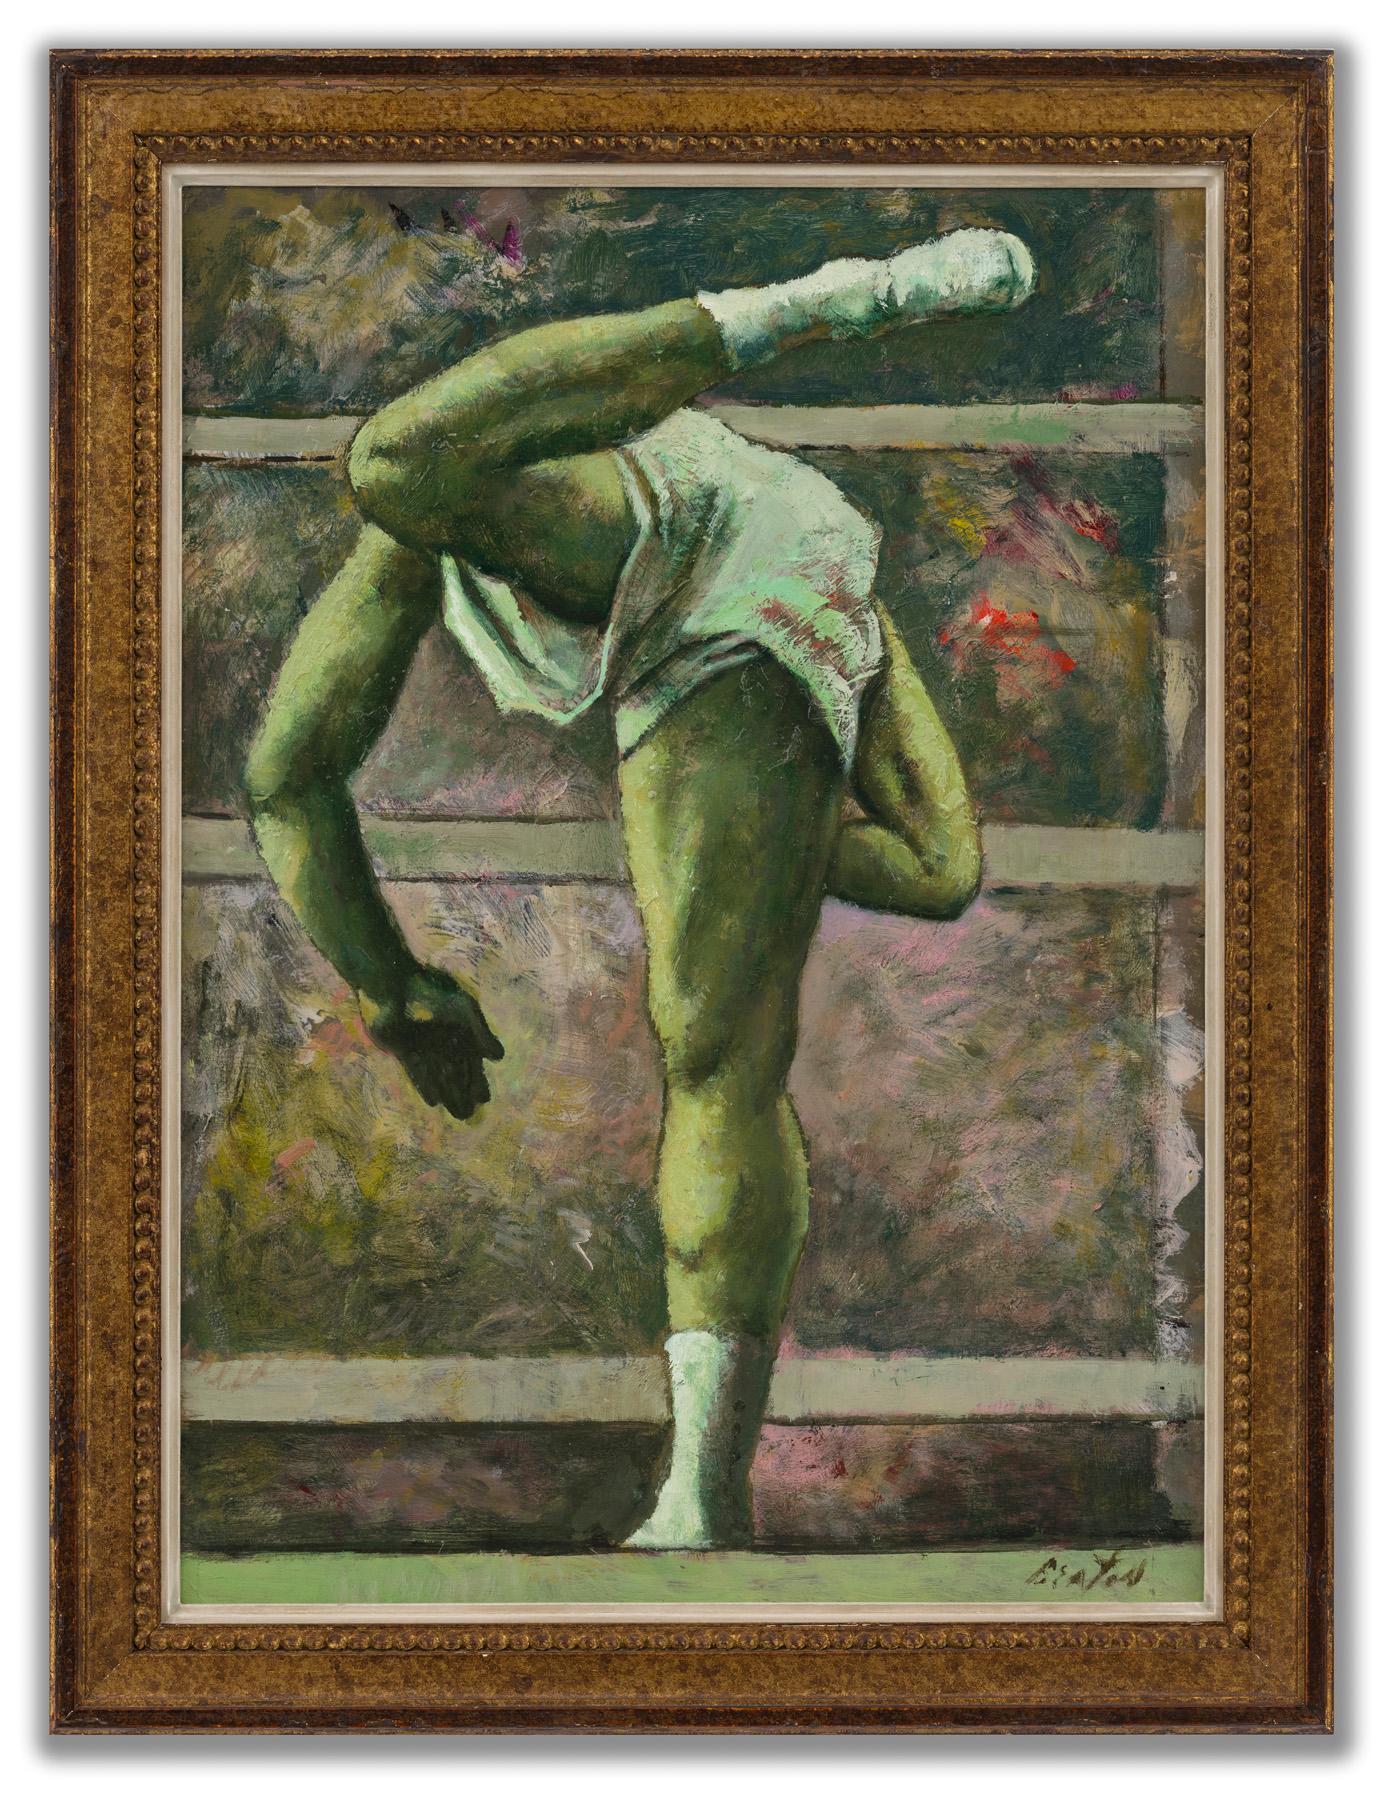 Cecil Beaton Figurative Painting - An Athlete